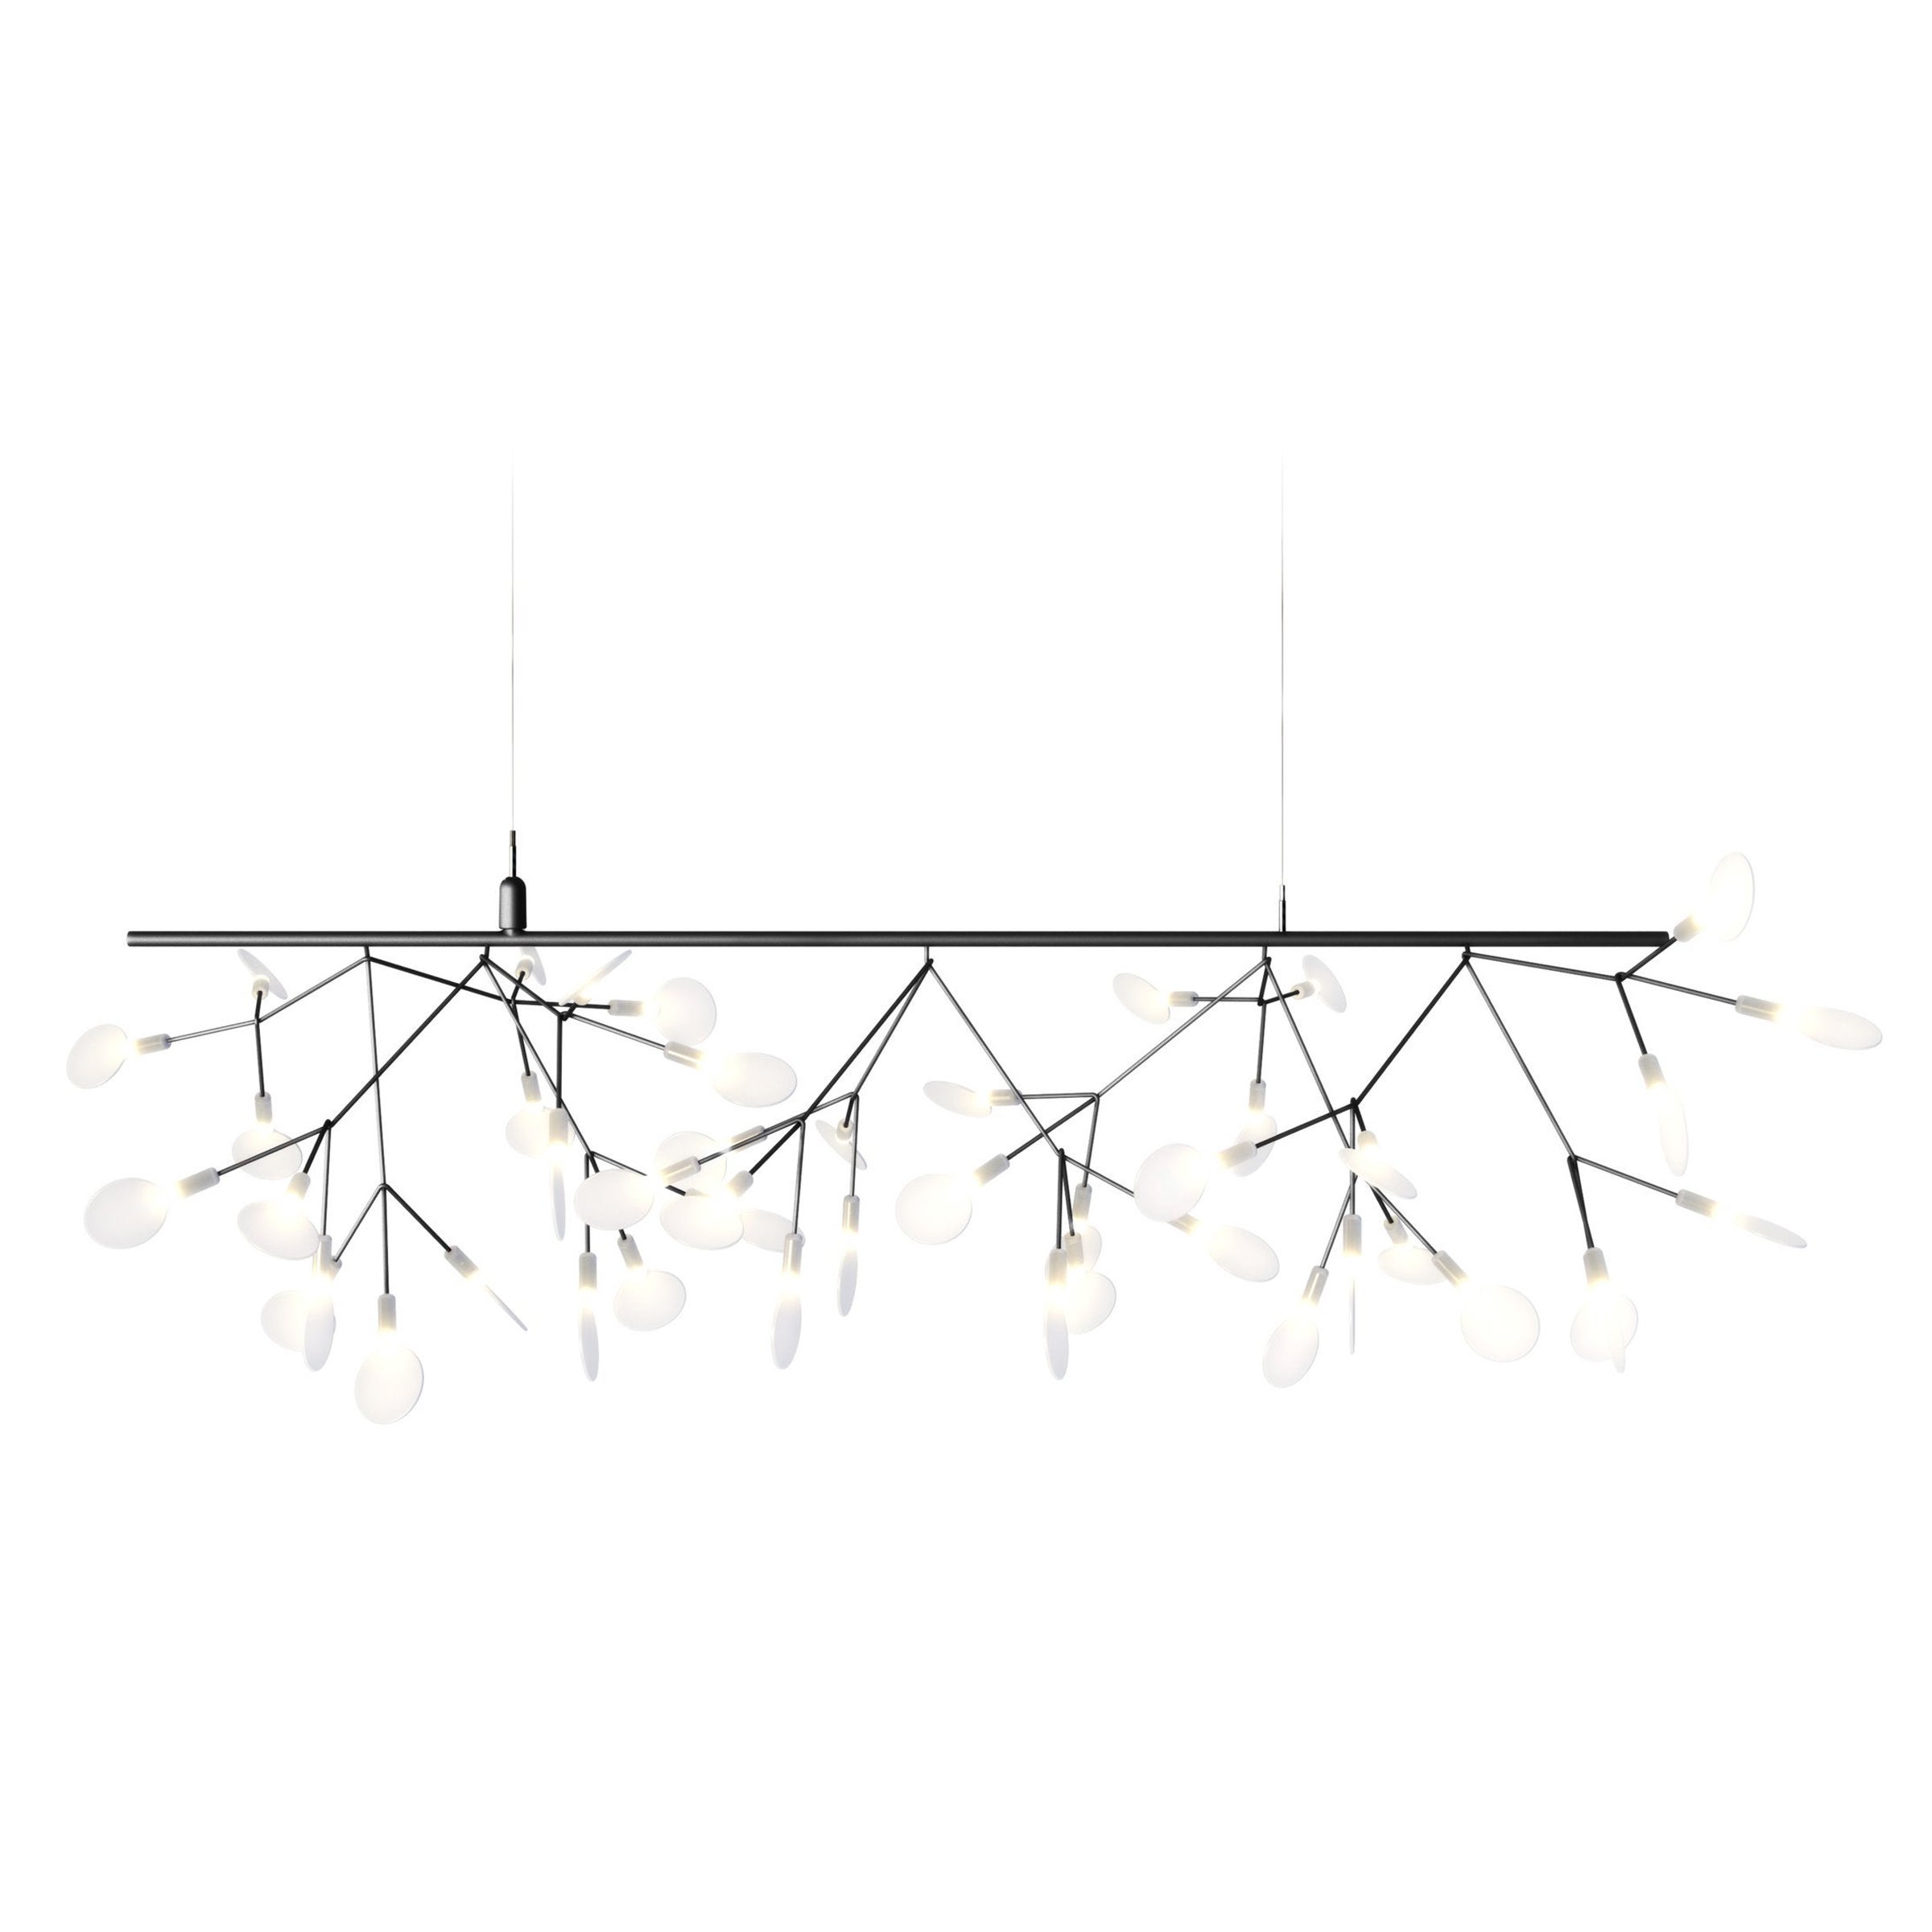 Moooi Heracleum Endless Suspension Lamp in Nickel with Polycarbonate Lenses, 10m For Sale